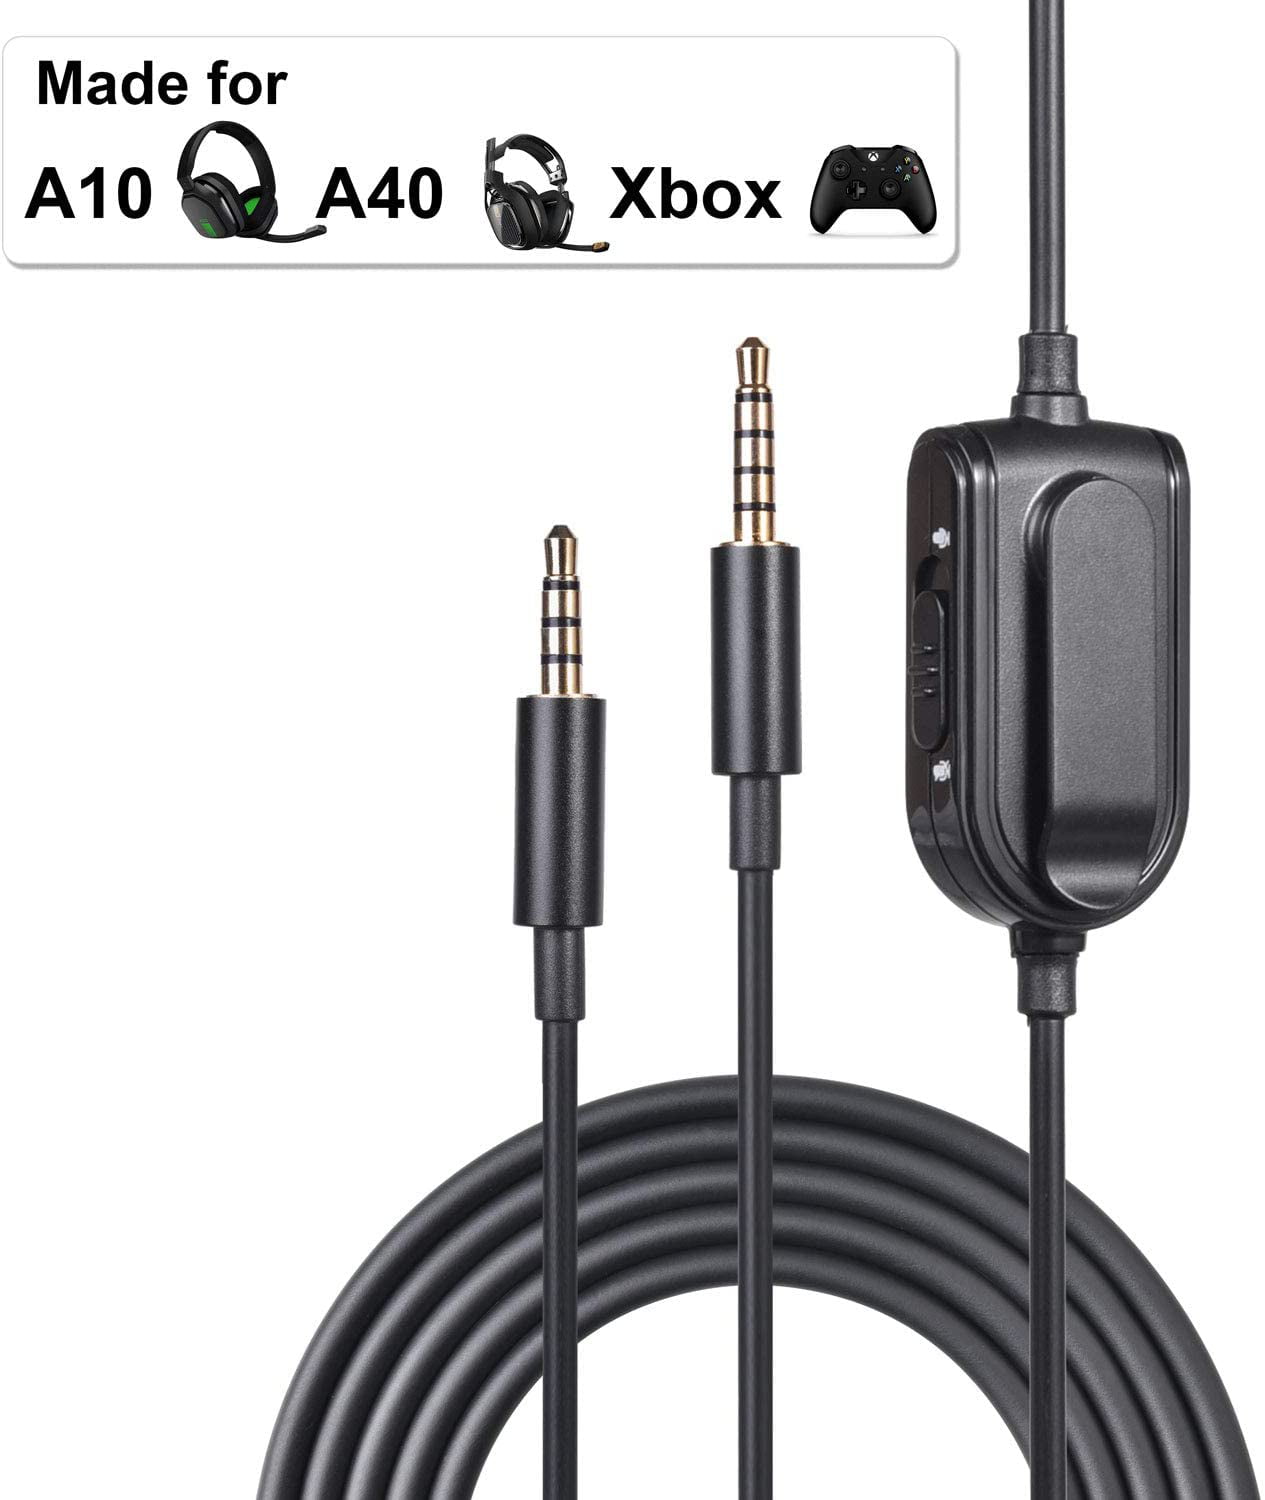 Replacement 2.0M Astro A10 Volume Cable Cord with Volume Control Function Also Works with A40/A40TR Gaming Headsets Xbox one ps4 Controller 